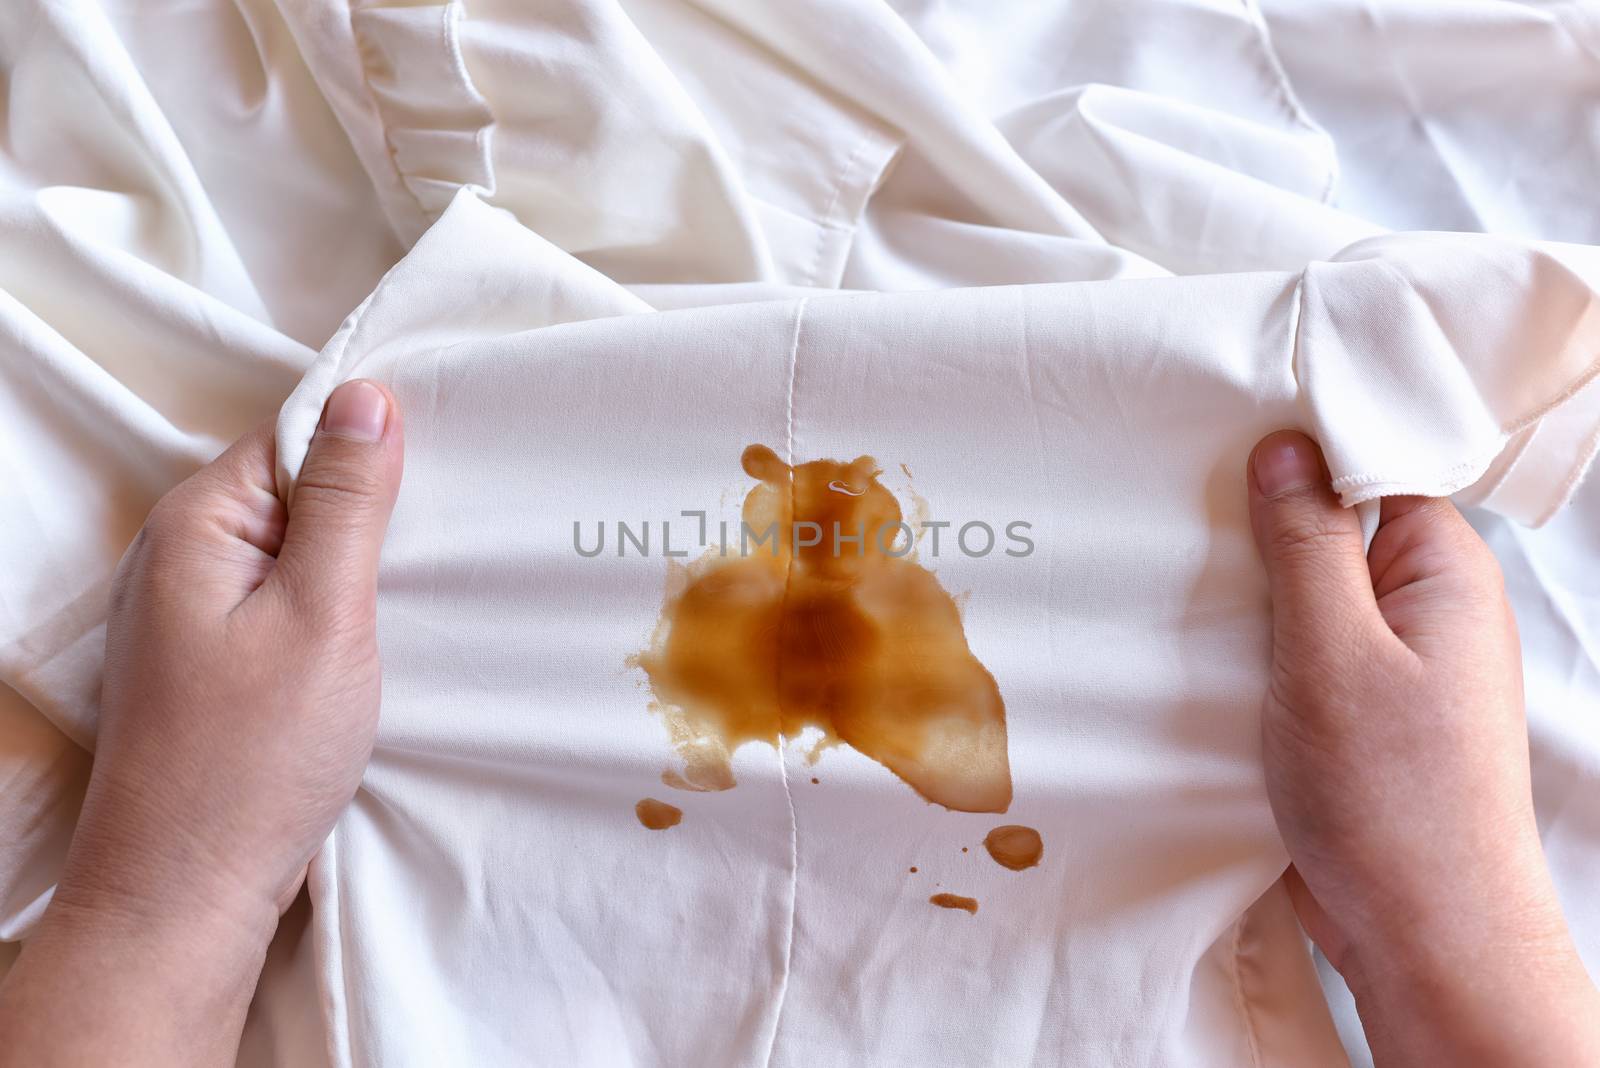 Dirty sauce stain on fabric from accident in daily life. Concept by C_Aphirak